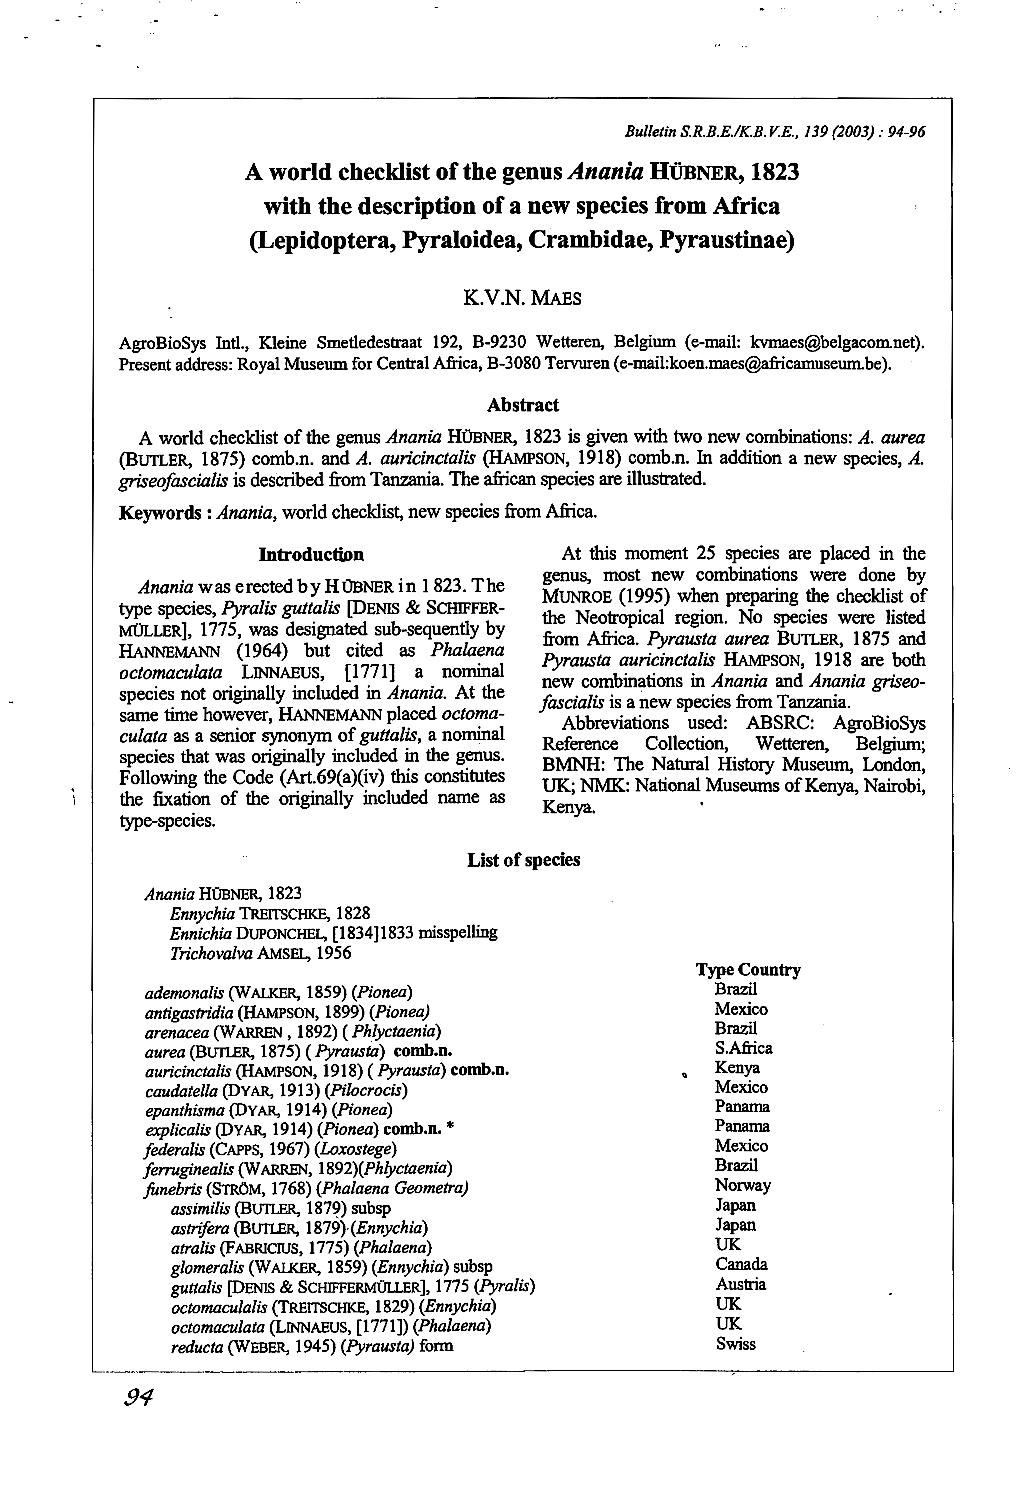 A World Checklist of the Genus Anania HUHNER, 1823 with the Description of a New Species from Africa (Lepidoptera, Pyraloidea, Crambidae, Pyraustinae)